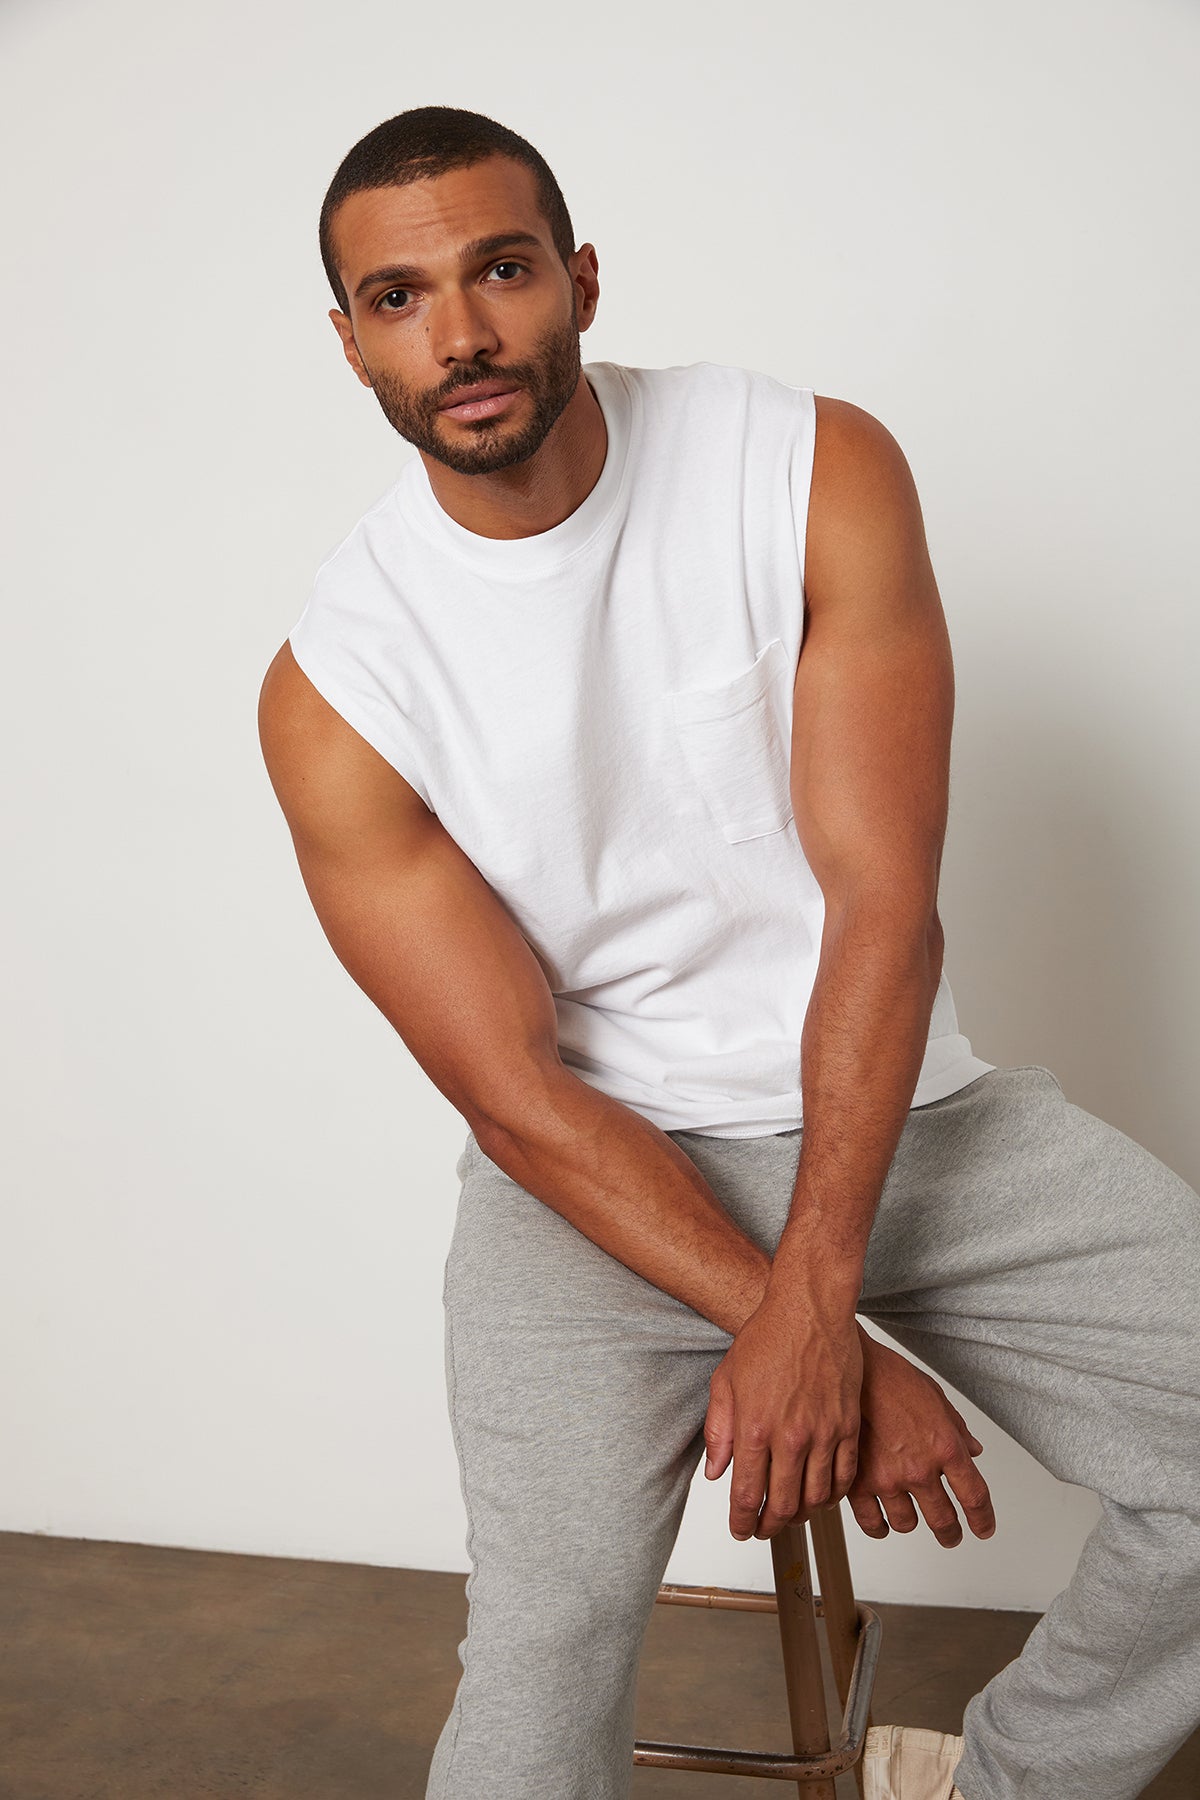 Bodhi Crew Neck Muscle Tee in White with Judas Pant in Heather Grey with Model Sitting on Stool.-24705813250241